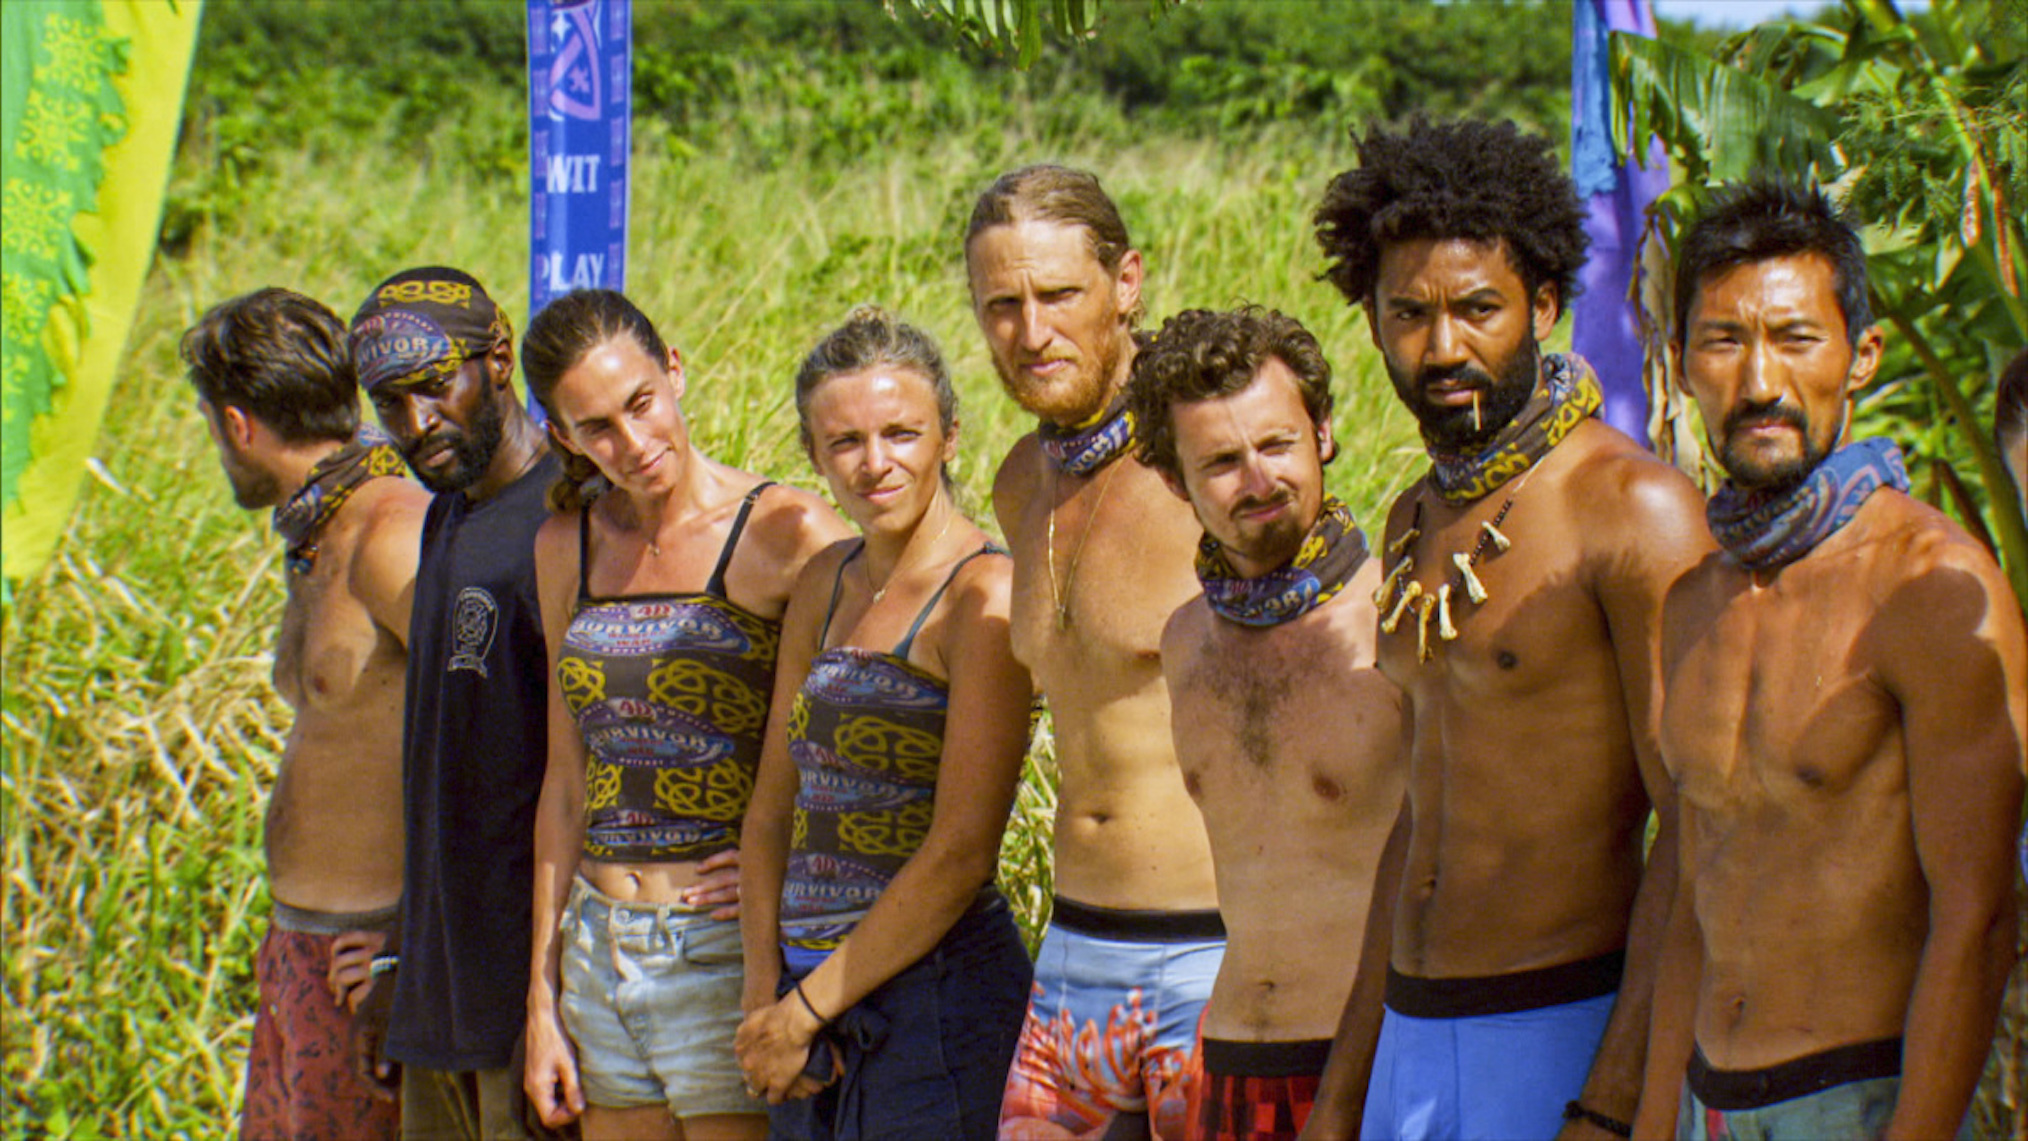 20 Years of 'Survivor' How Did 'Winners at War' Change the Scope of